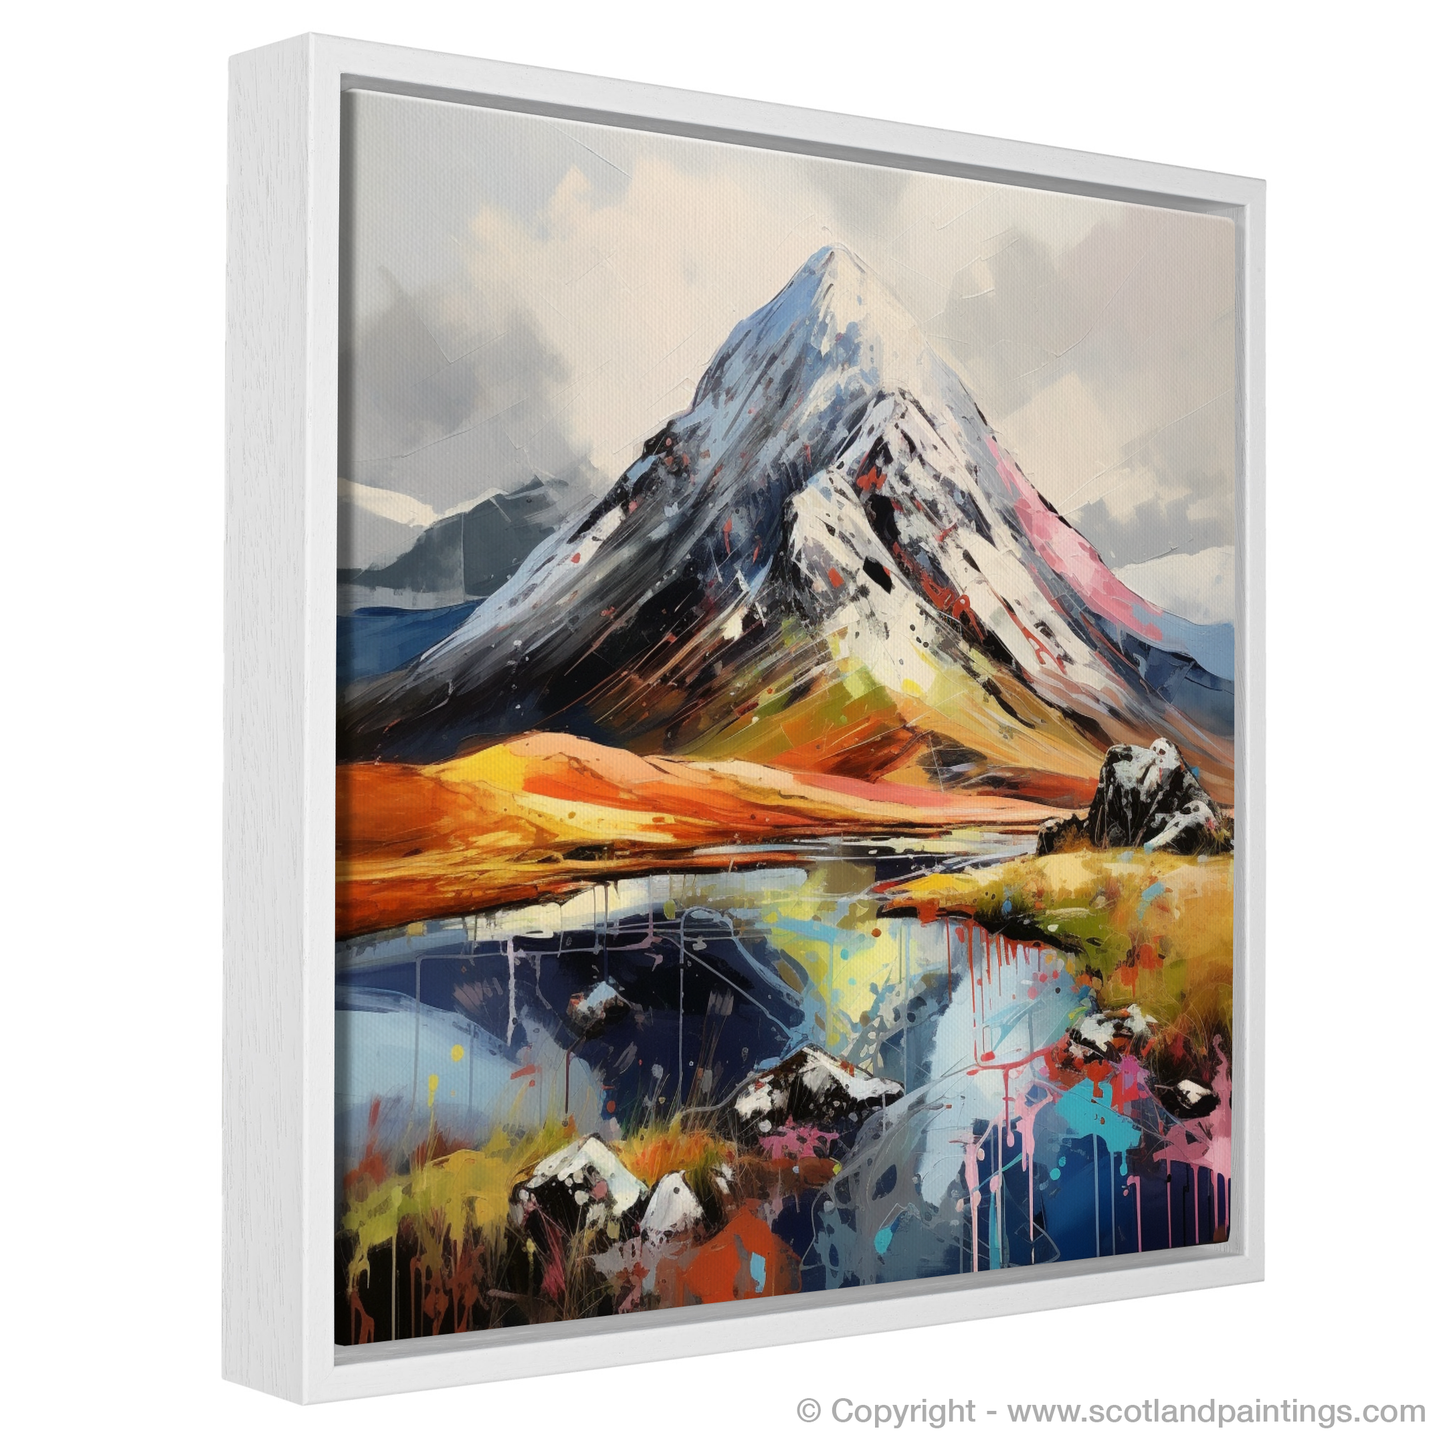 Painting and Art Print of Stob Dubh (Buachaille Etive Beag) entitled "Majestic Sentinel of Stob Dubh: An Expressionist Ode to the Scottish Highlands".